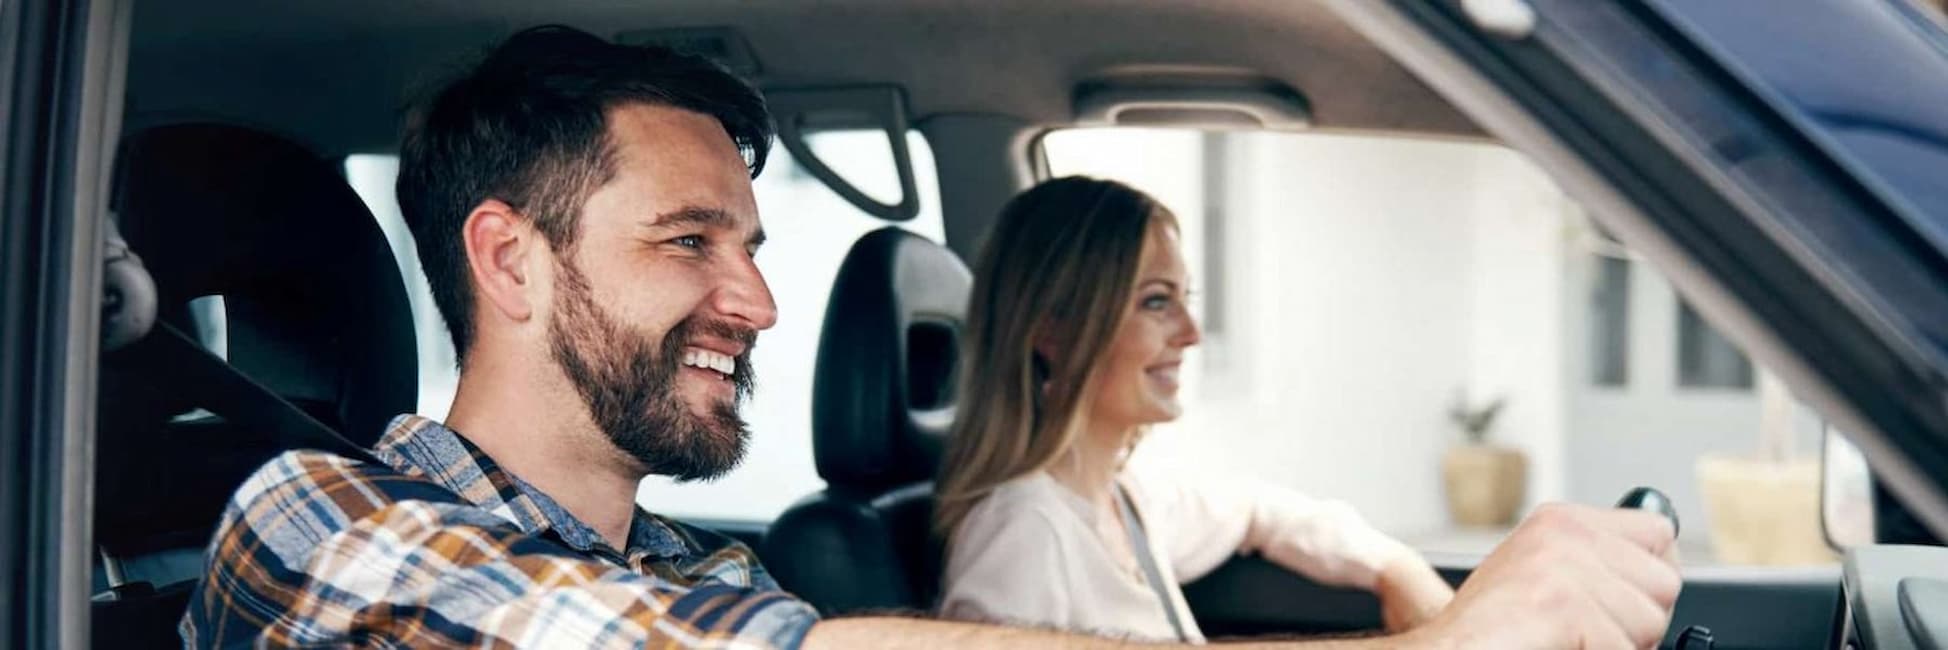 man and woman smiling in car